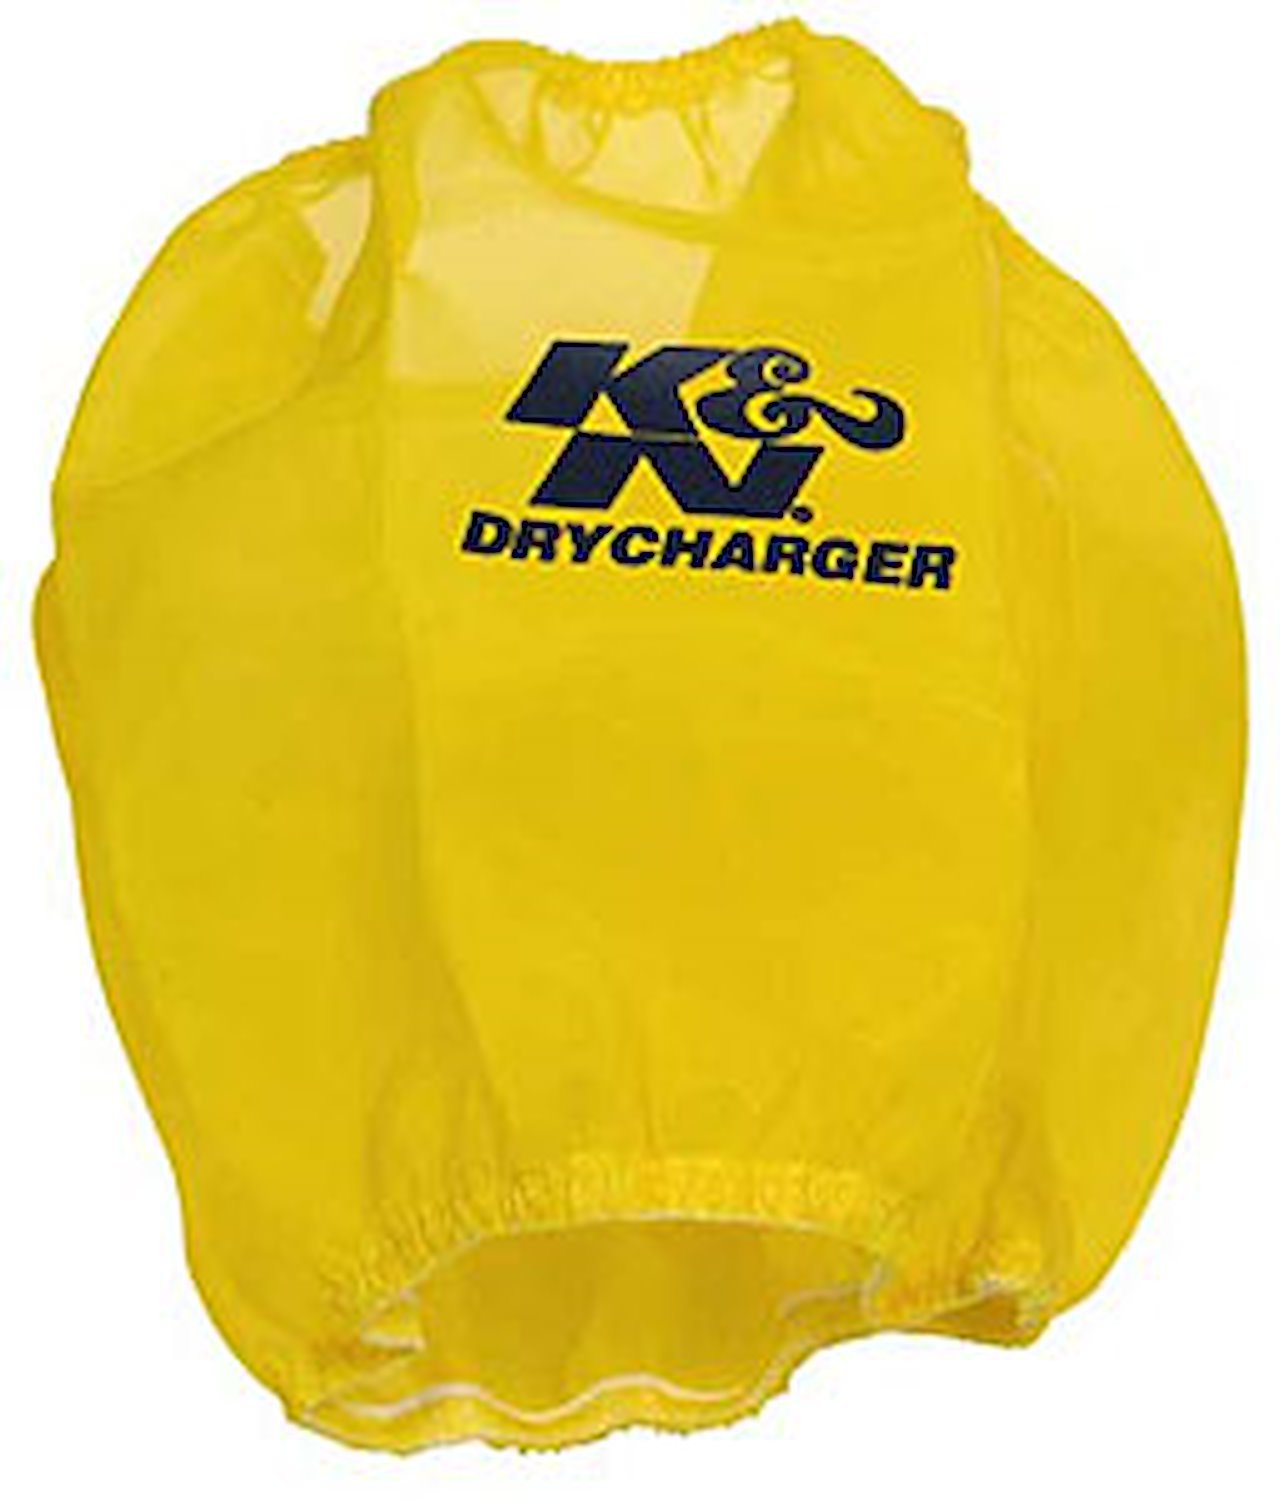 DRYCHARGER WRAP RP-5103 YELLOW